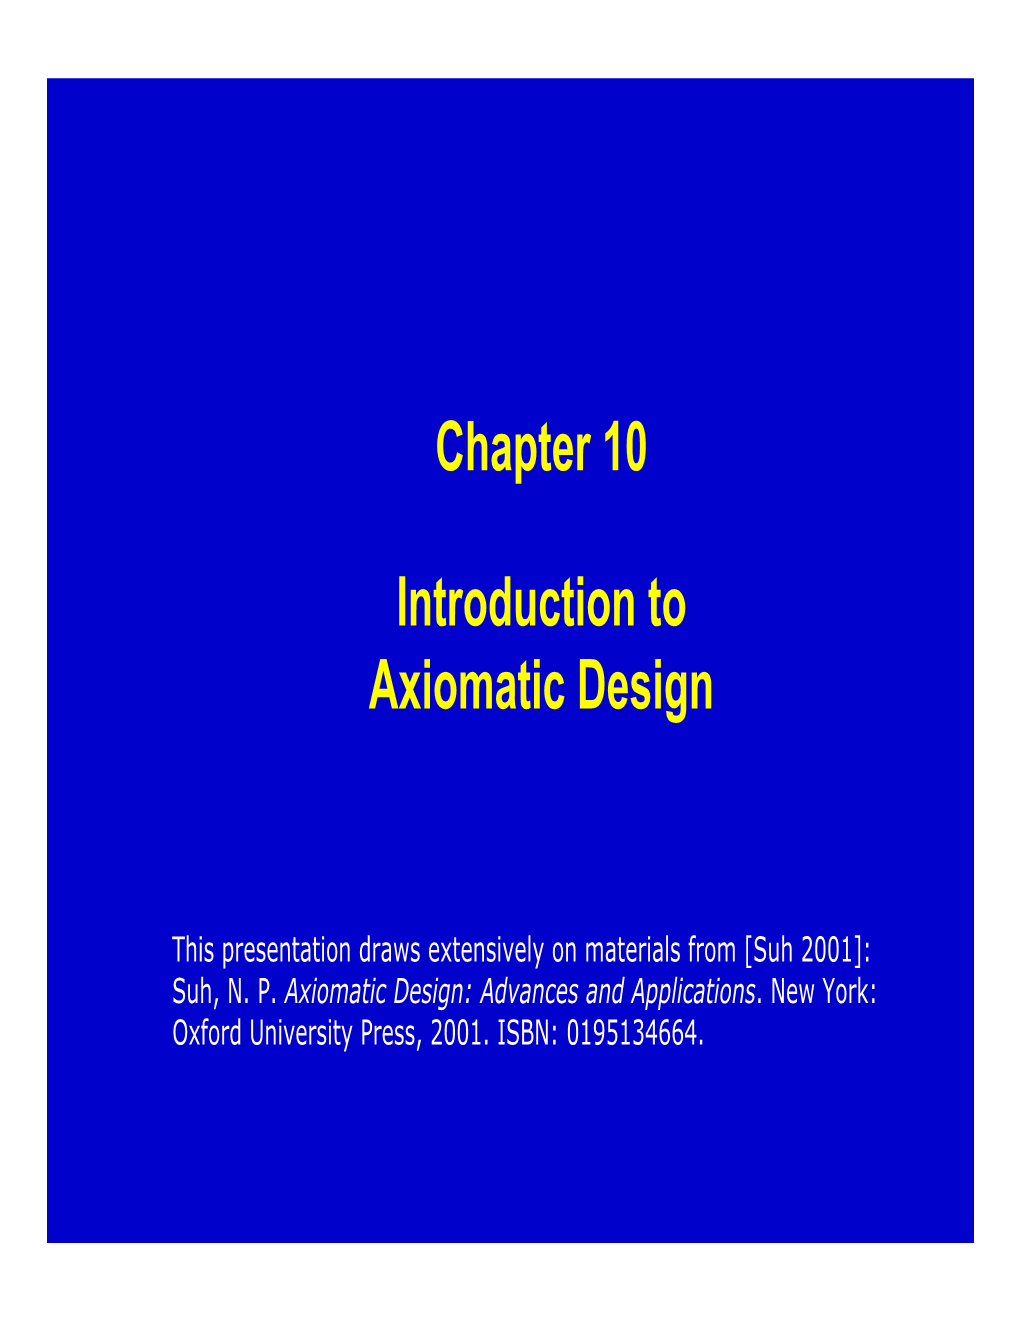 Chapter 10 Introduction to Axiomatic Design